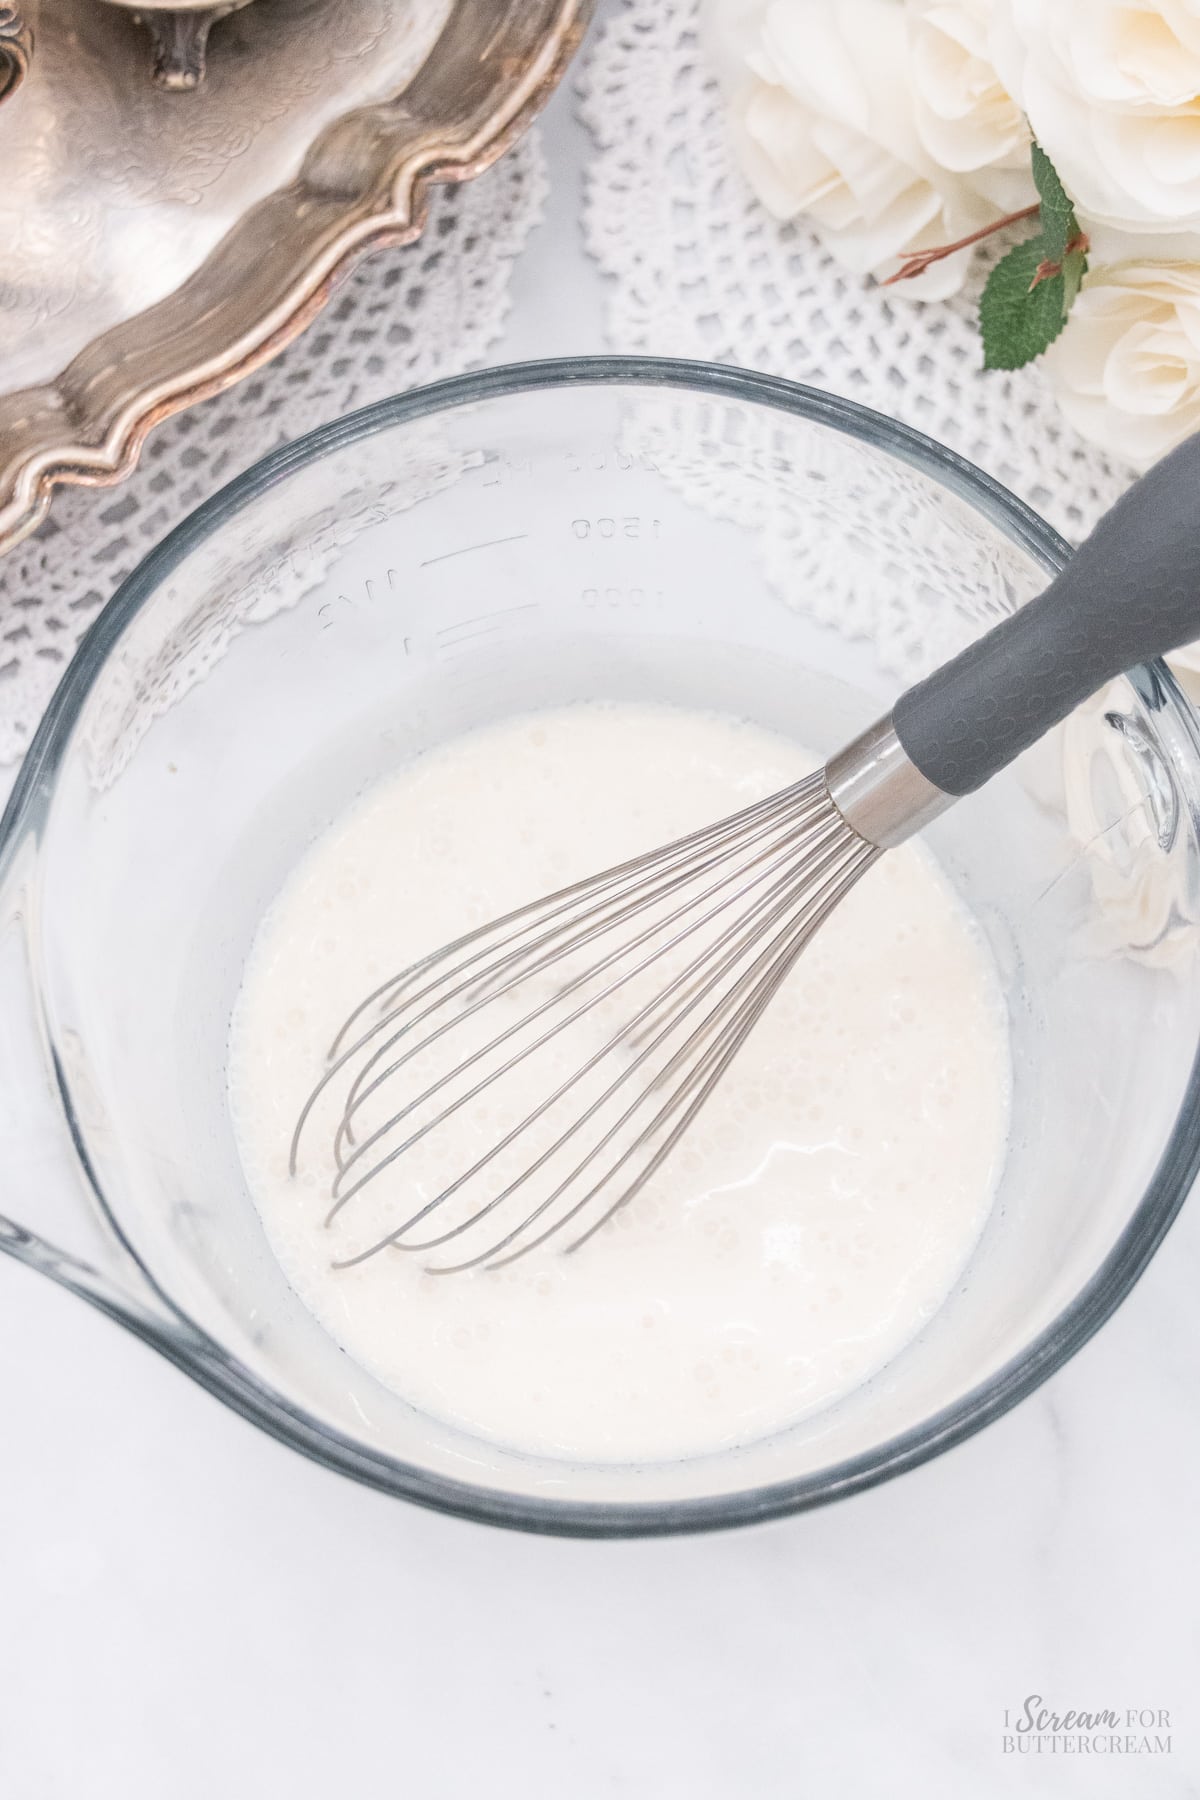 Liquid cake batter ingredients on a glass bowl with a whisk.